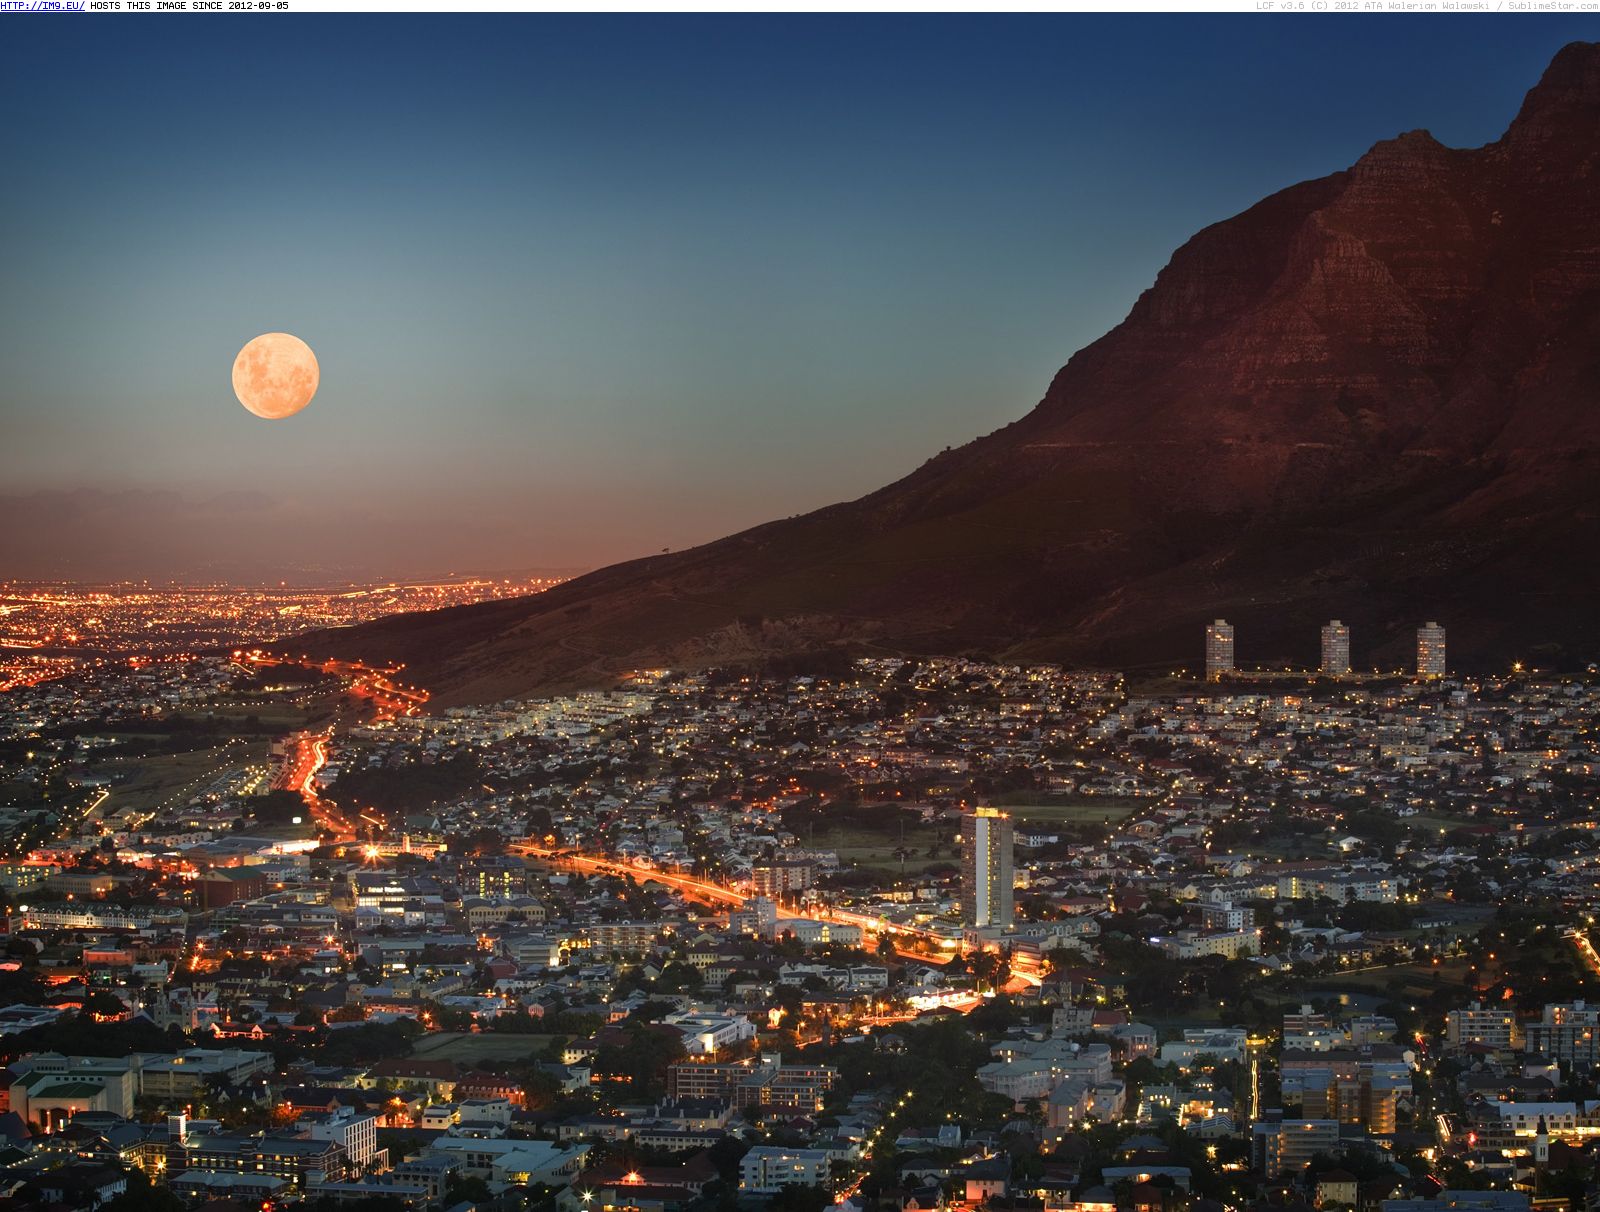 #Wallpaper #Beautiful #Pretty #Full #Cape #Highres #Nicemoon #South #Town #Africa #Moon Full Moon Over Cape Town, South Africa Pic. (Image of album Beautiful photos and wallpapers))